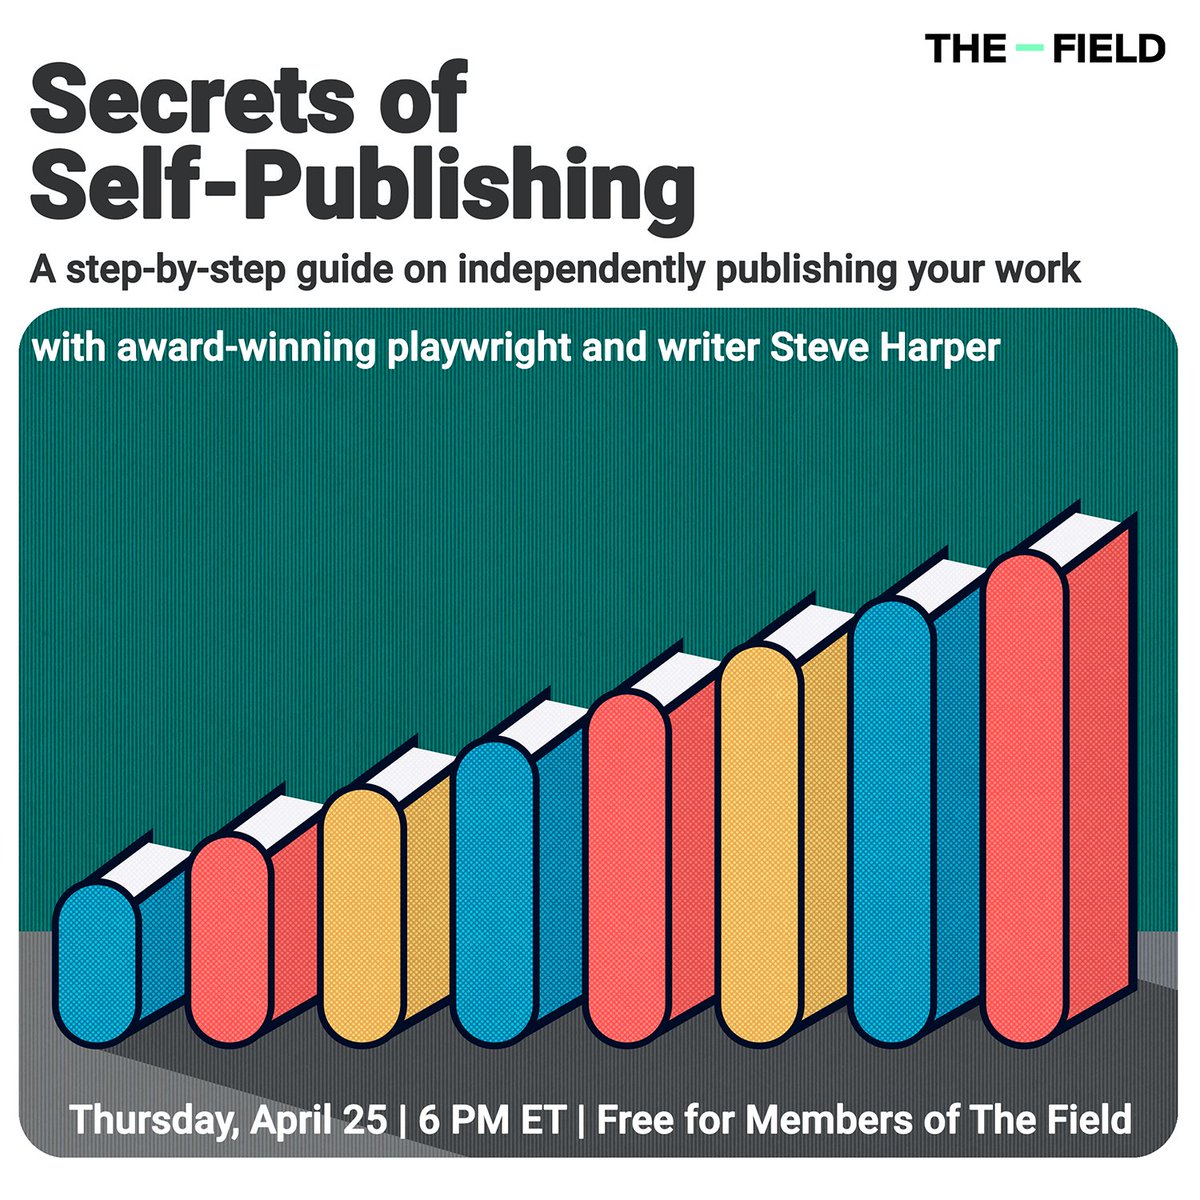 What if you have a great idea for a book, but no publisher? Choosing to publish your own work is a viable alternative to the traditional approach. In this toolbox presented by @harpercreates you’ll learn the essential steps of self-publishing. app.thefield.org/event/288/Secr…